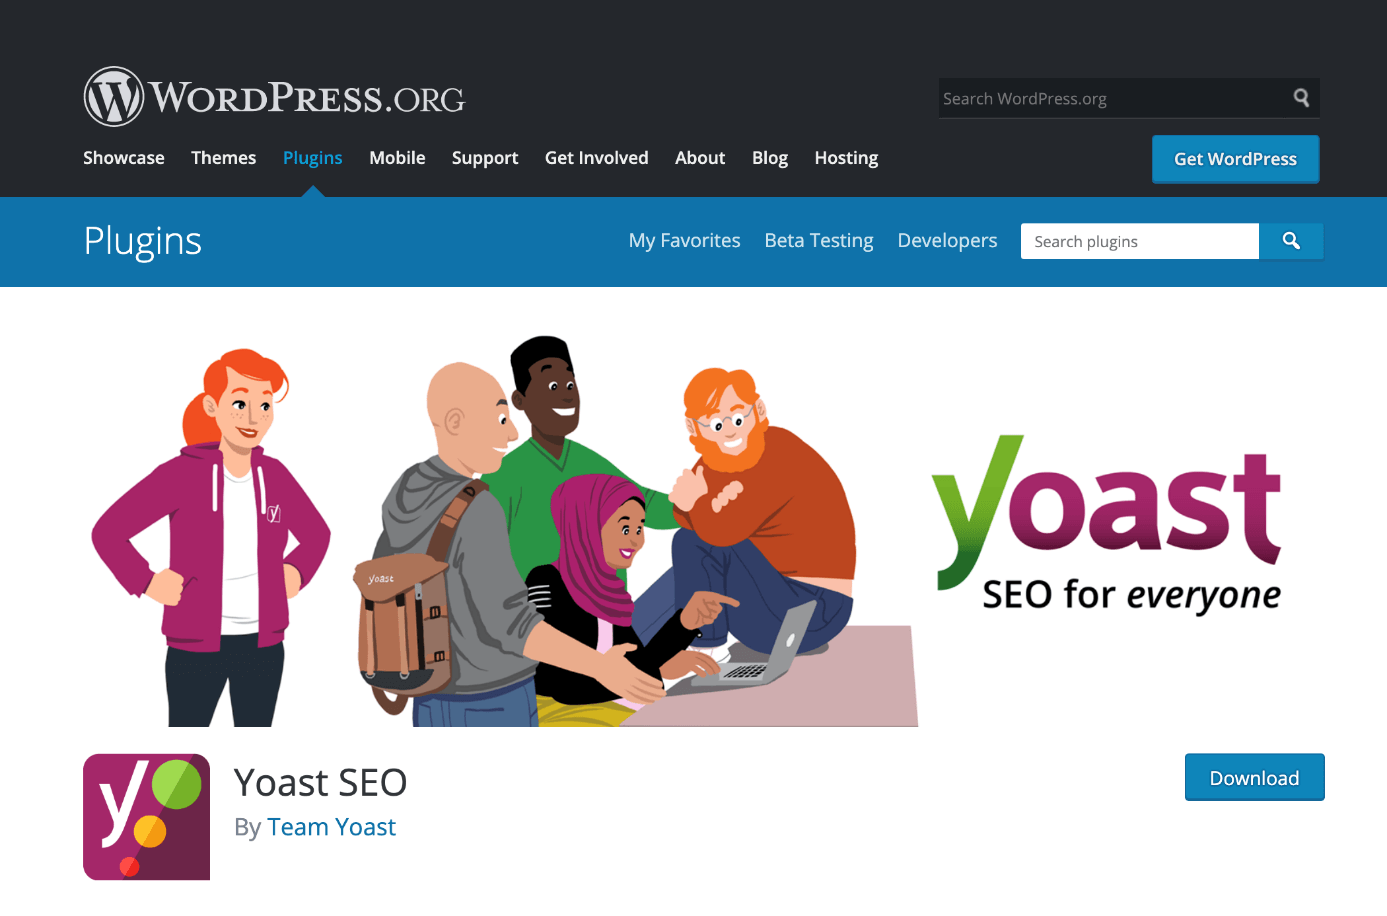 The Yoast SEO plug-in, available from WordPress.org